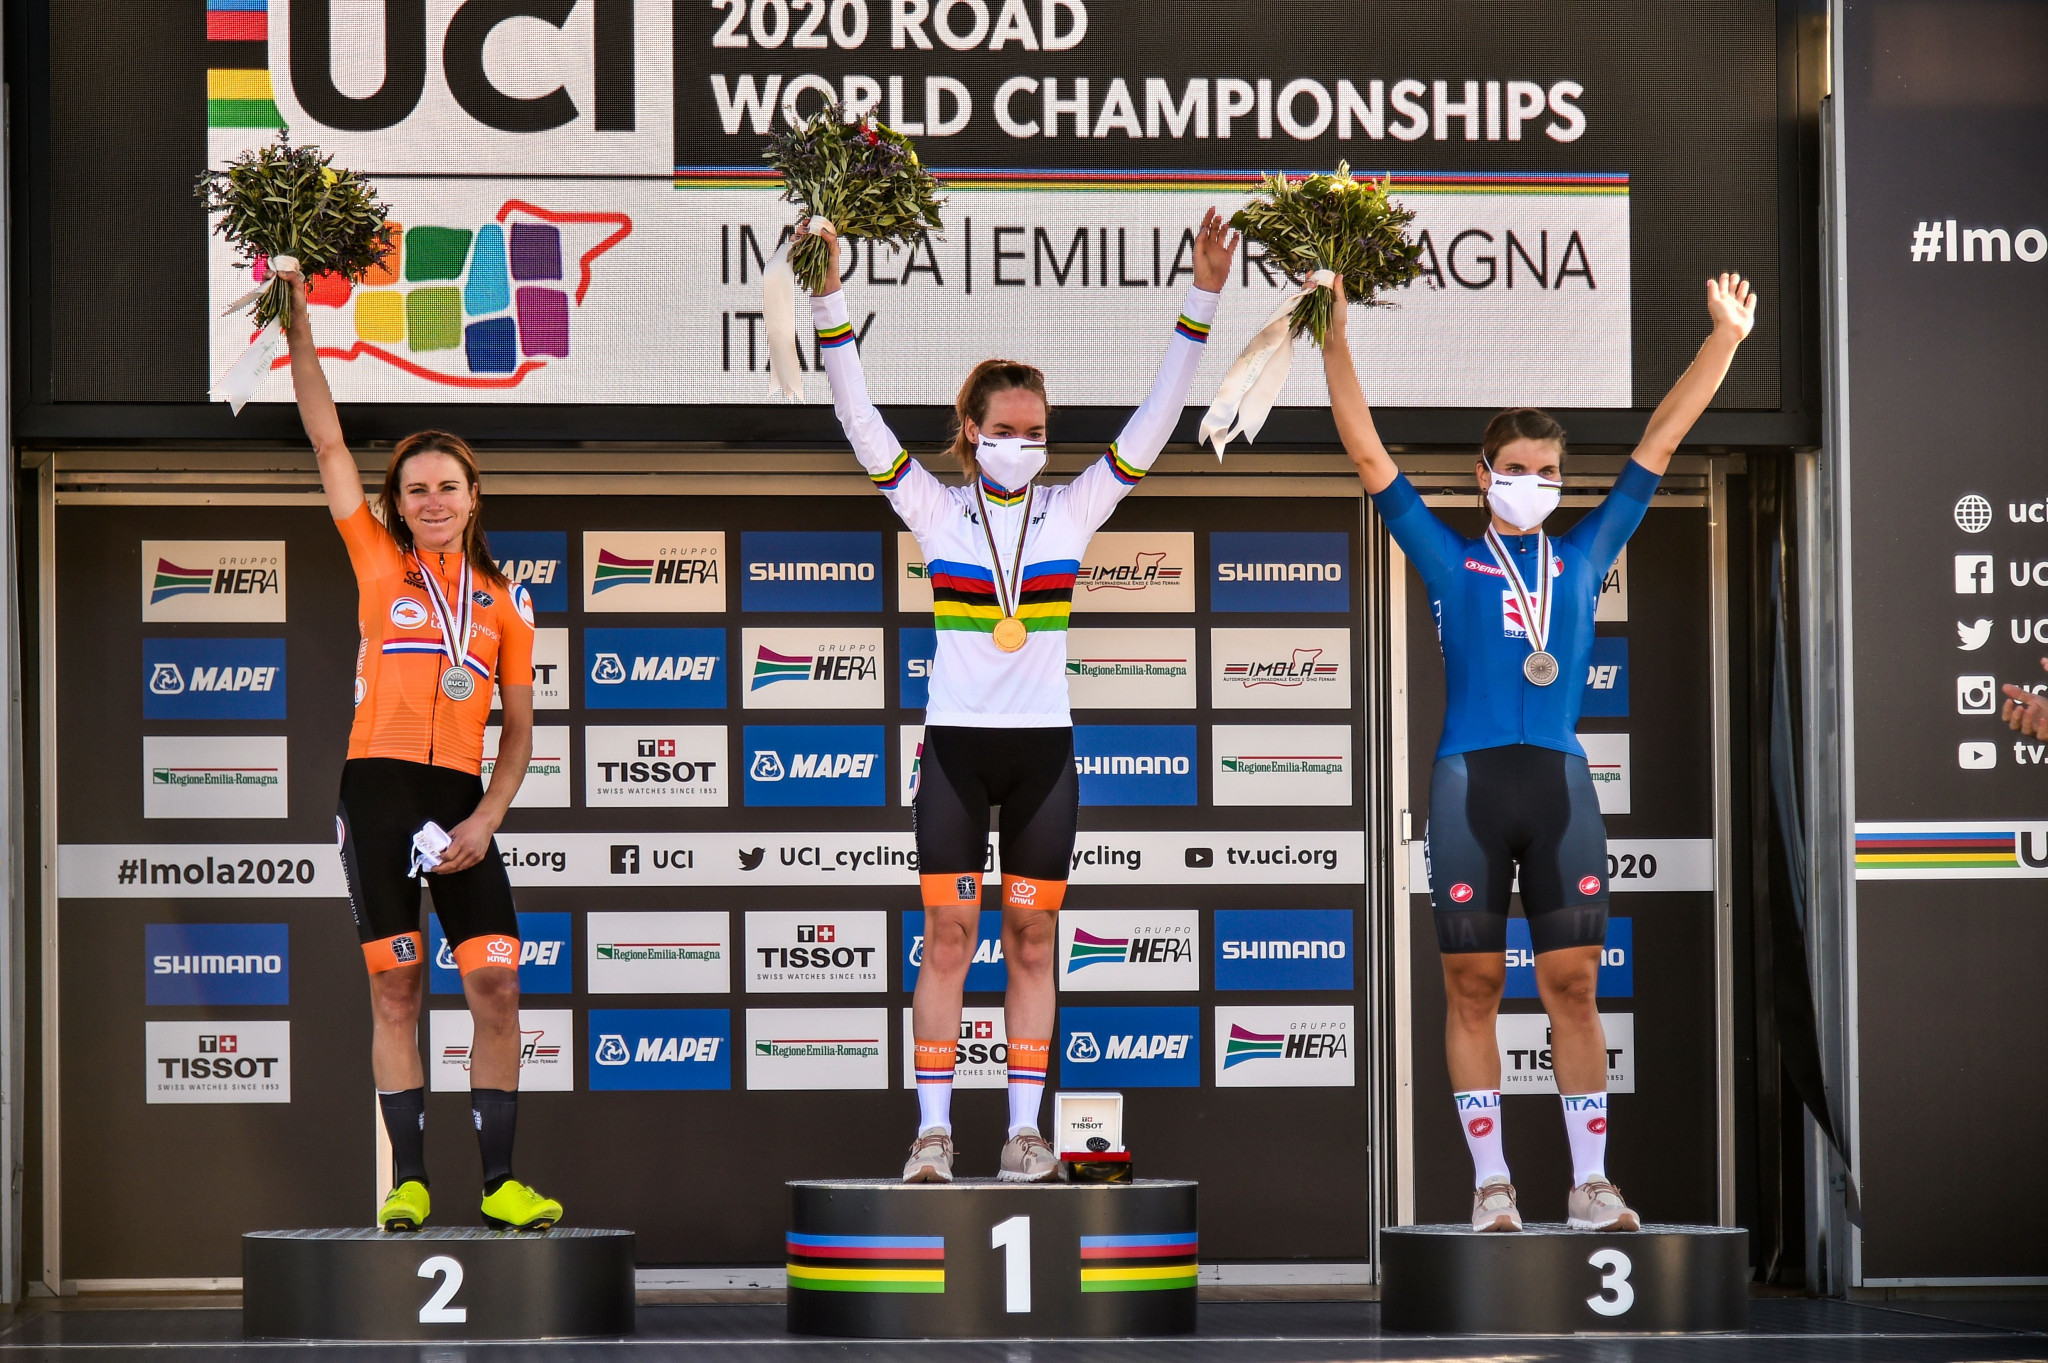 Anna van der Breggen became the second female rider to win road race and time trial gold medals at the same World Championships ©Getty Images